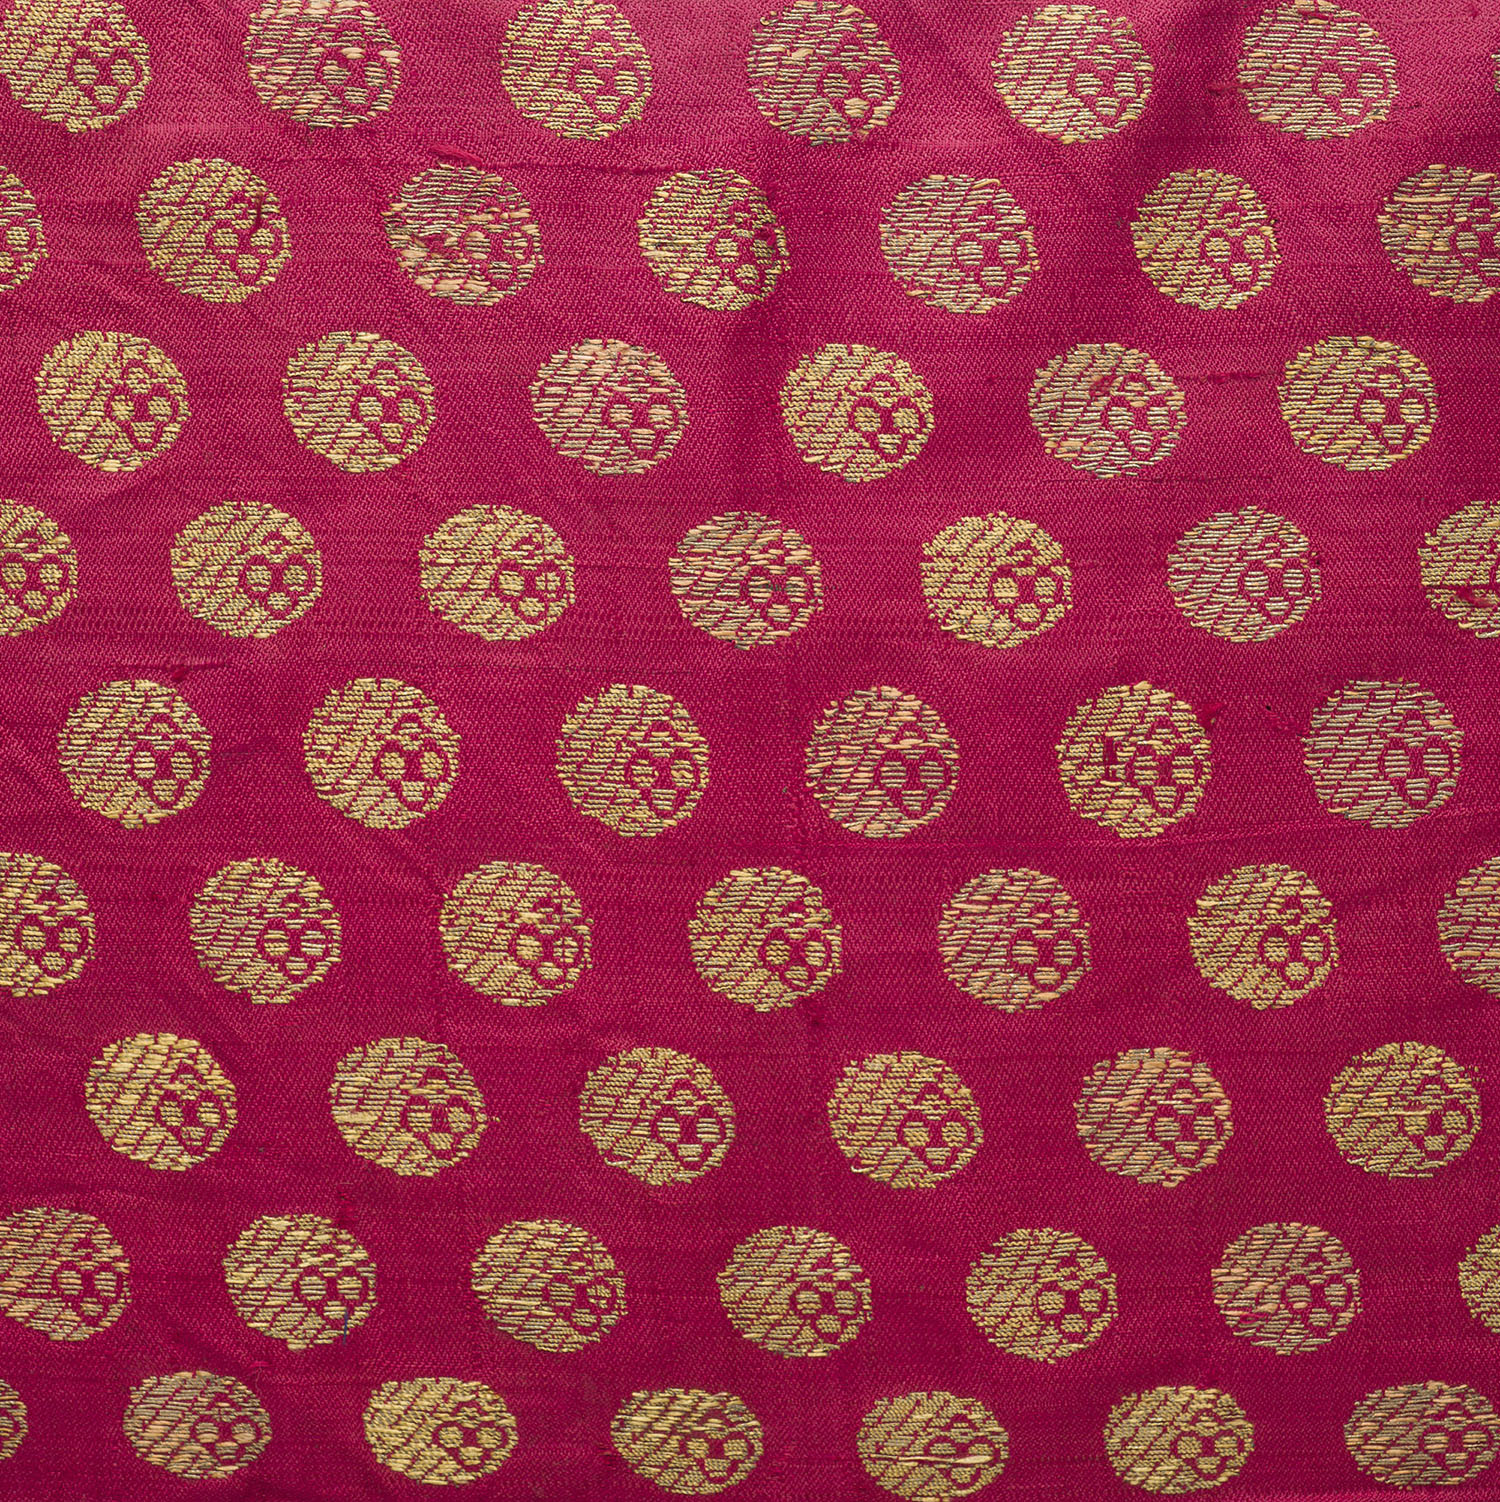 Multiple coin-shaped ashrafi motifs made of gold brocade on a piece of textile